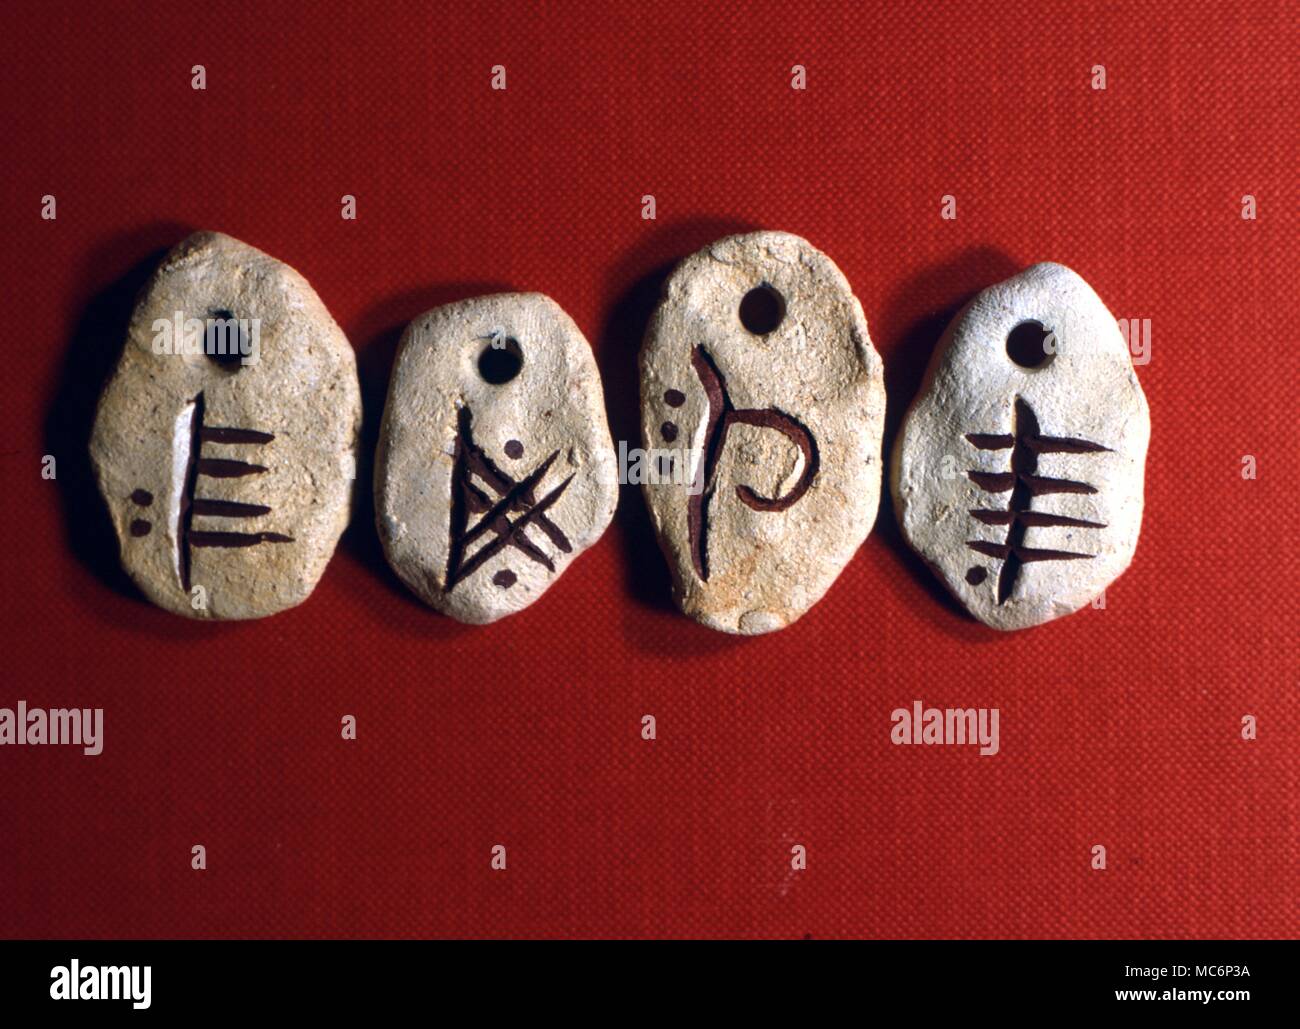 Celtic Ogham Stones, used in divination and alphabets. Left to right: February - S - Willow; Fire - PE - honeysuckle; Earth - PH - beech; Water - E - poplar. 2004 Charles Walker / Stock Photo